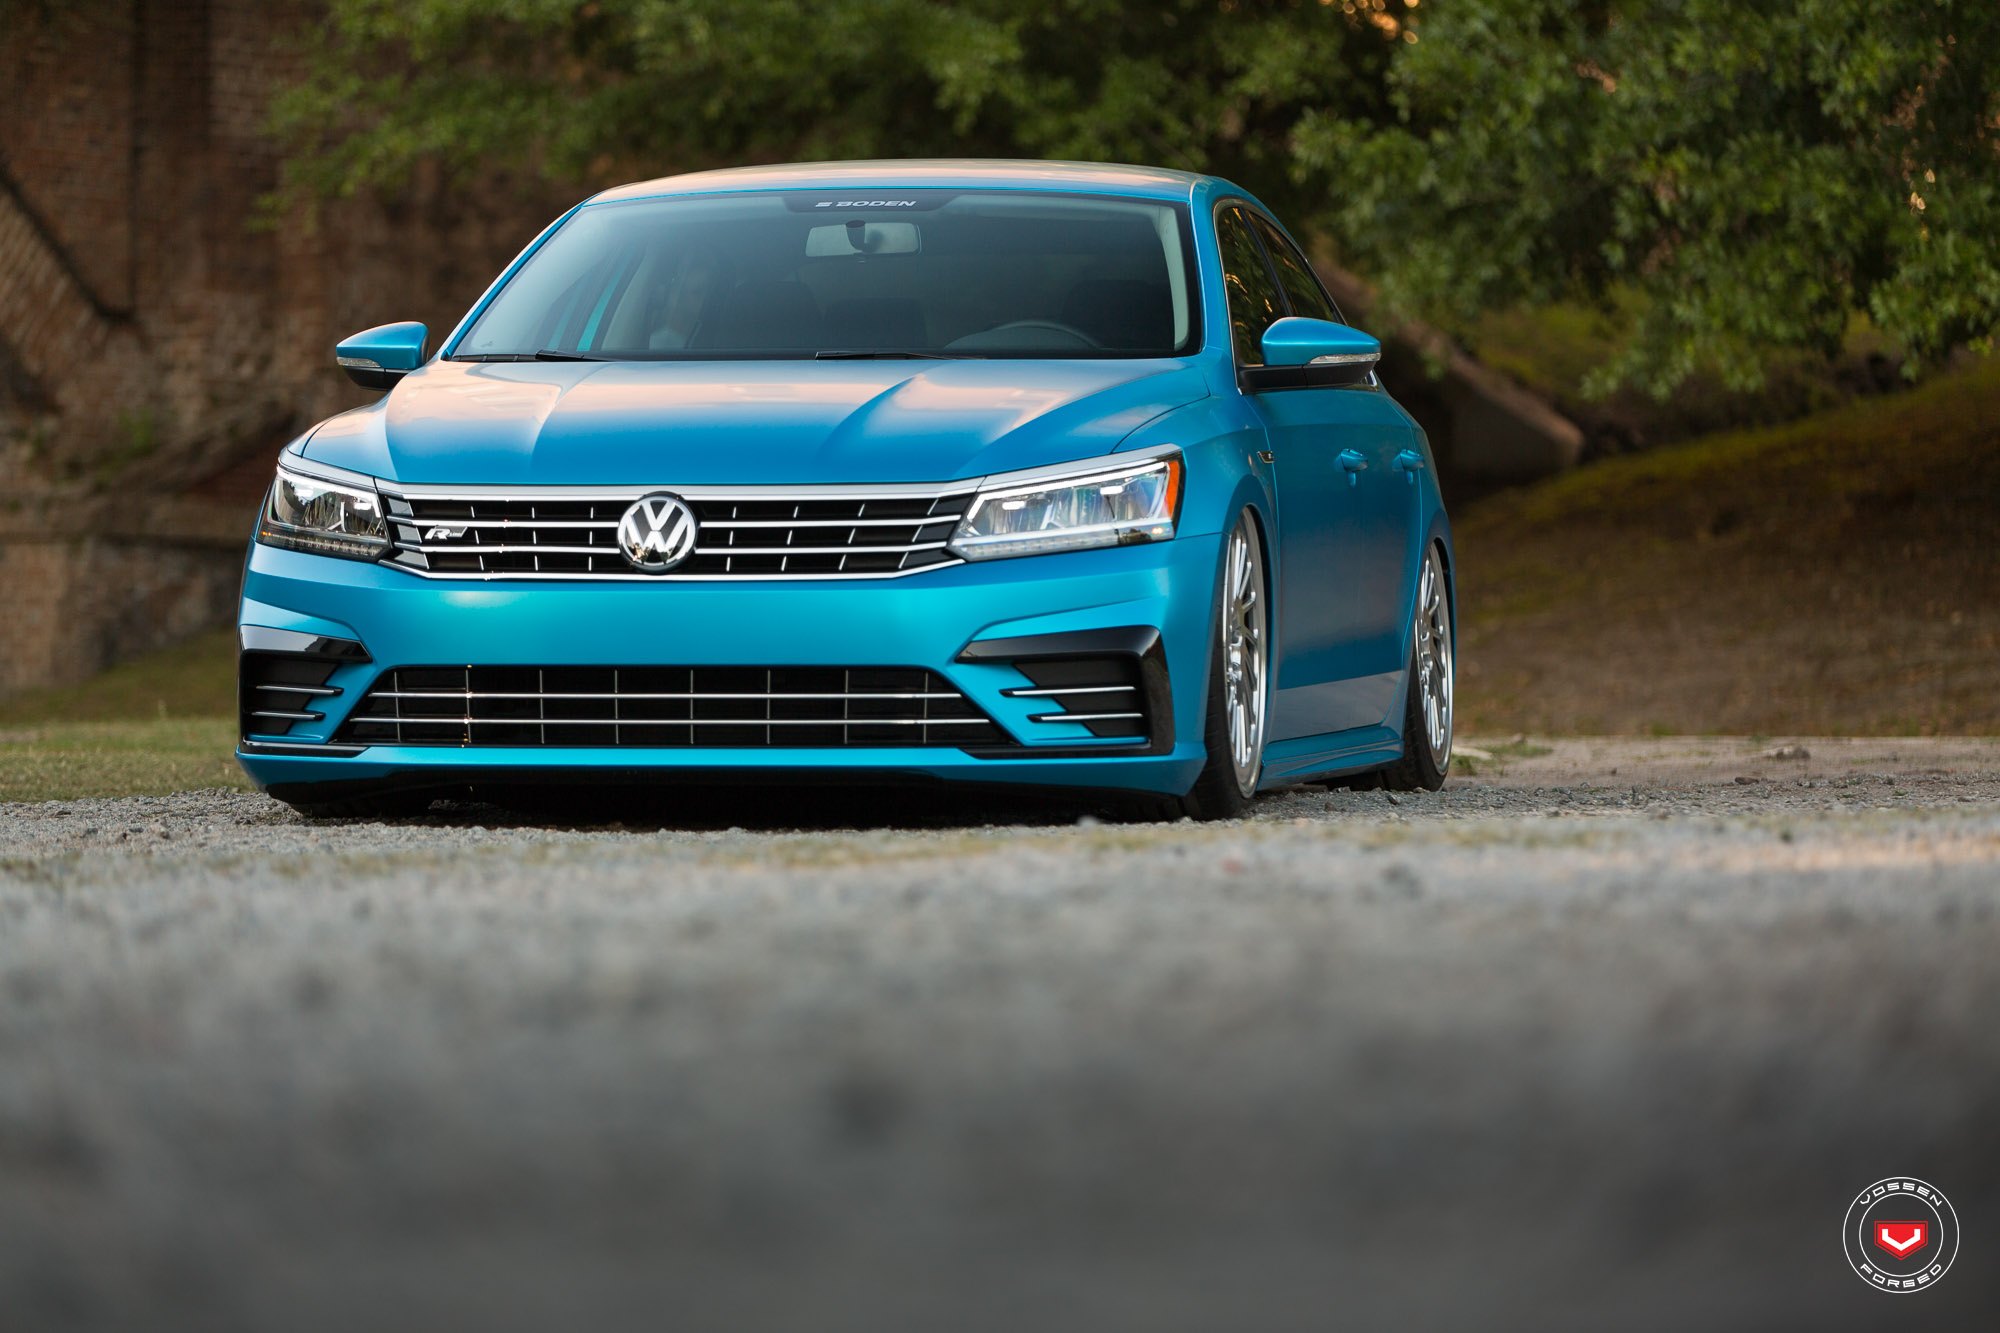 Slammed Passat With a Chrome Blue Wrap on Accuair Suspension and Vossens - Photo by Vossen